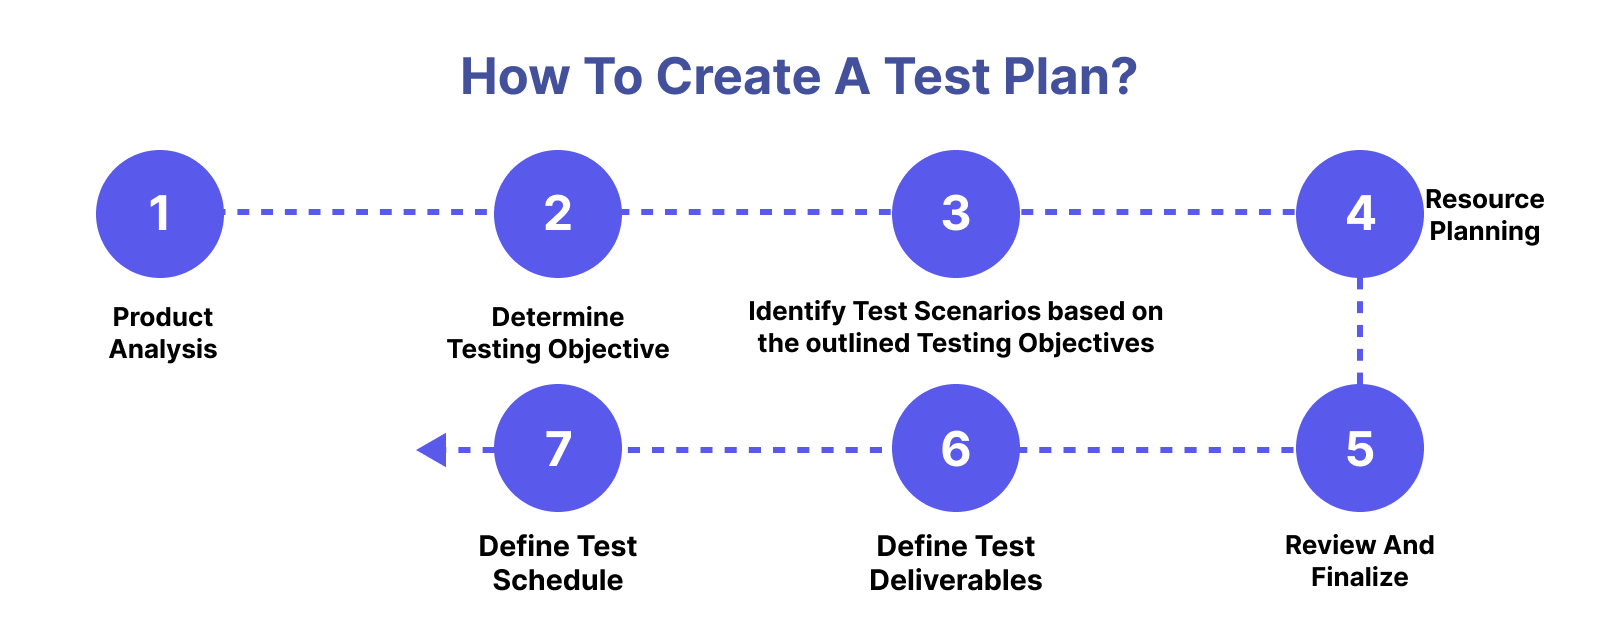 How To create a test plan